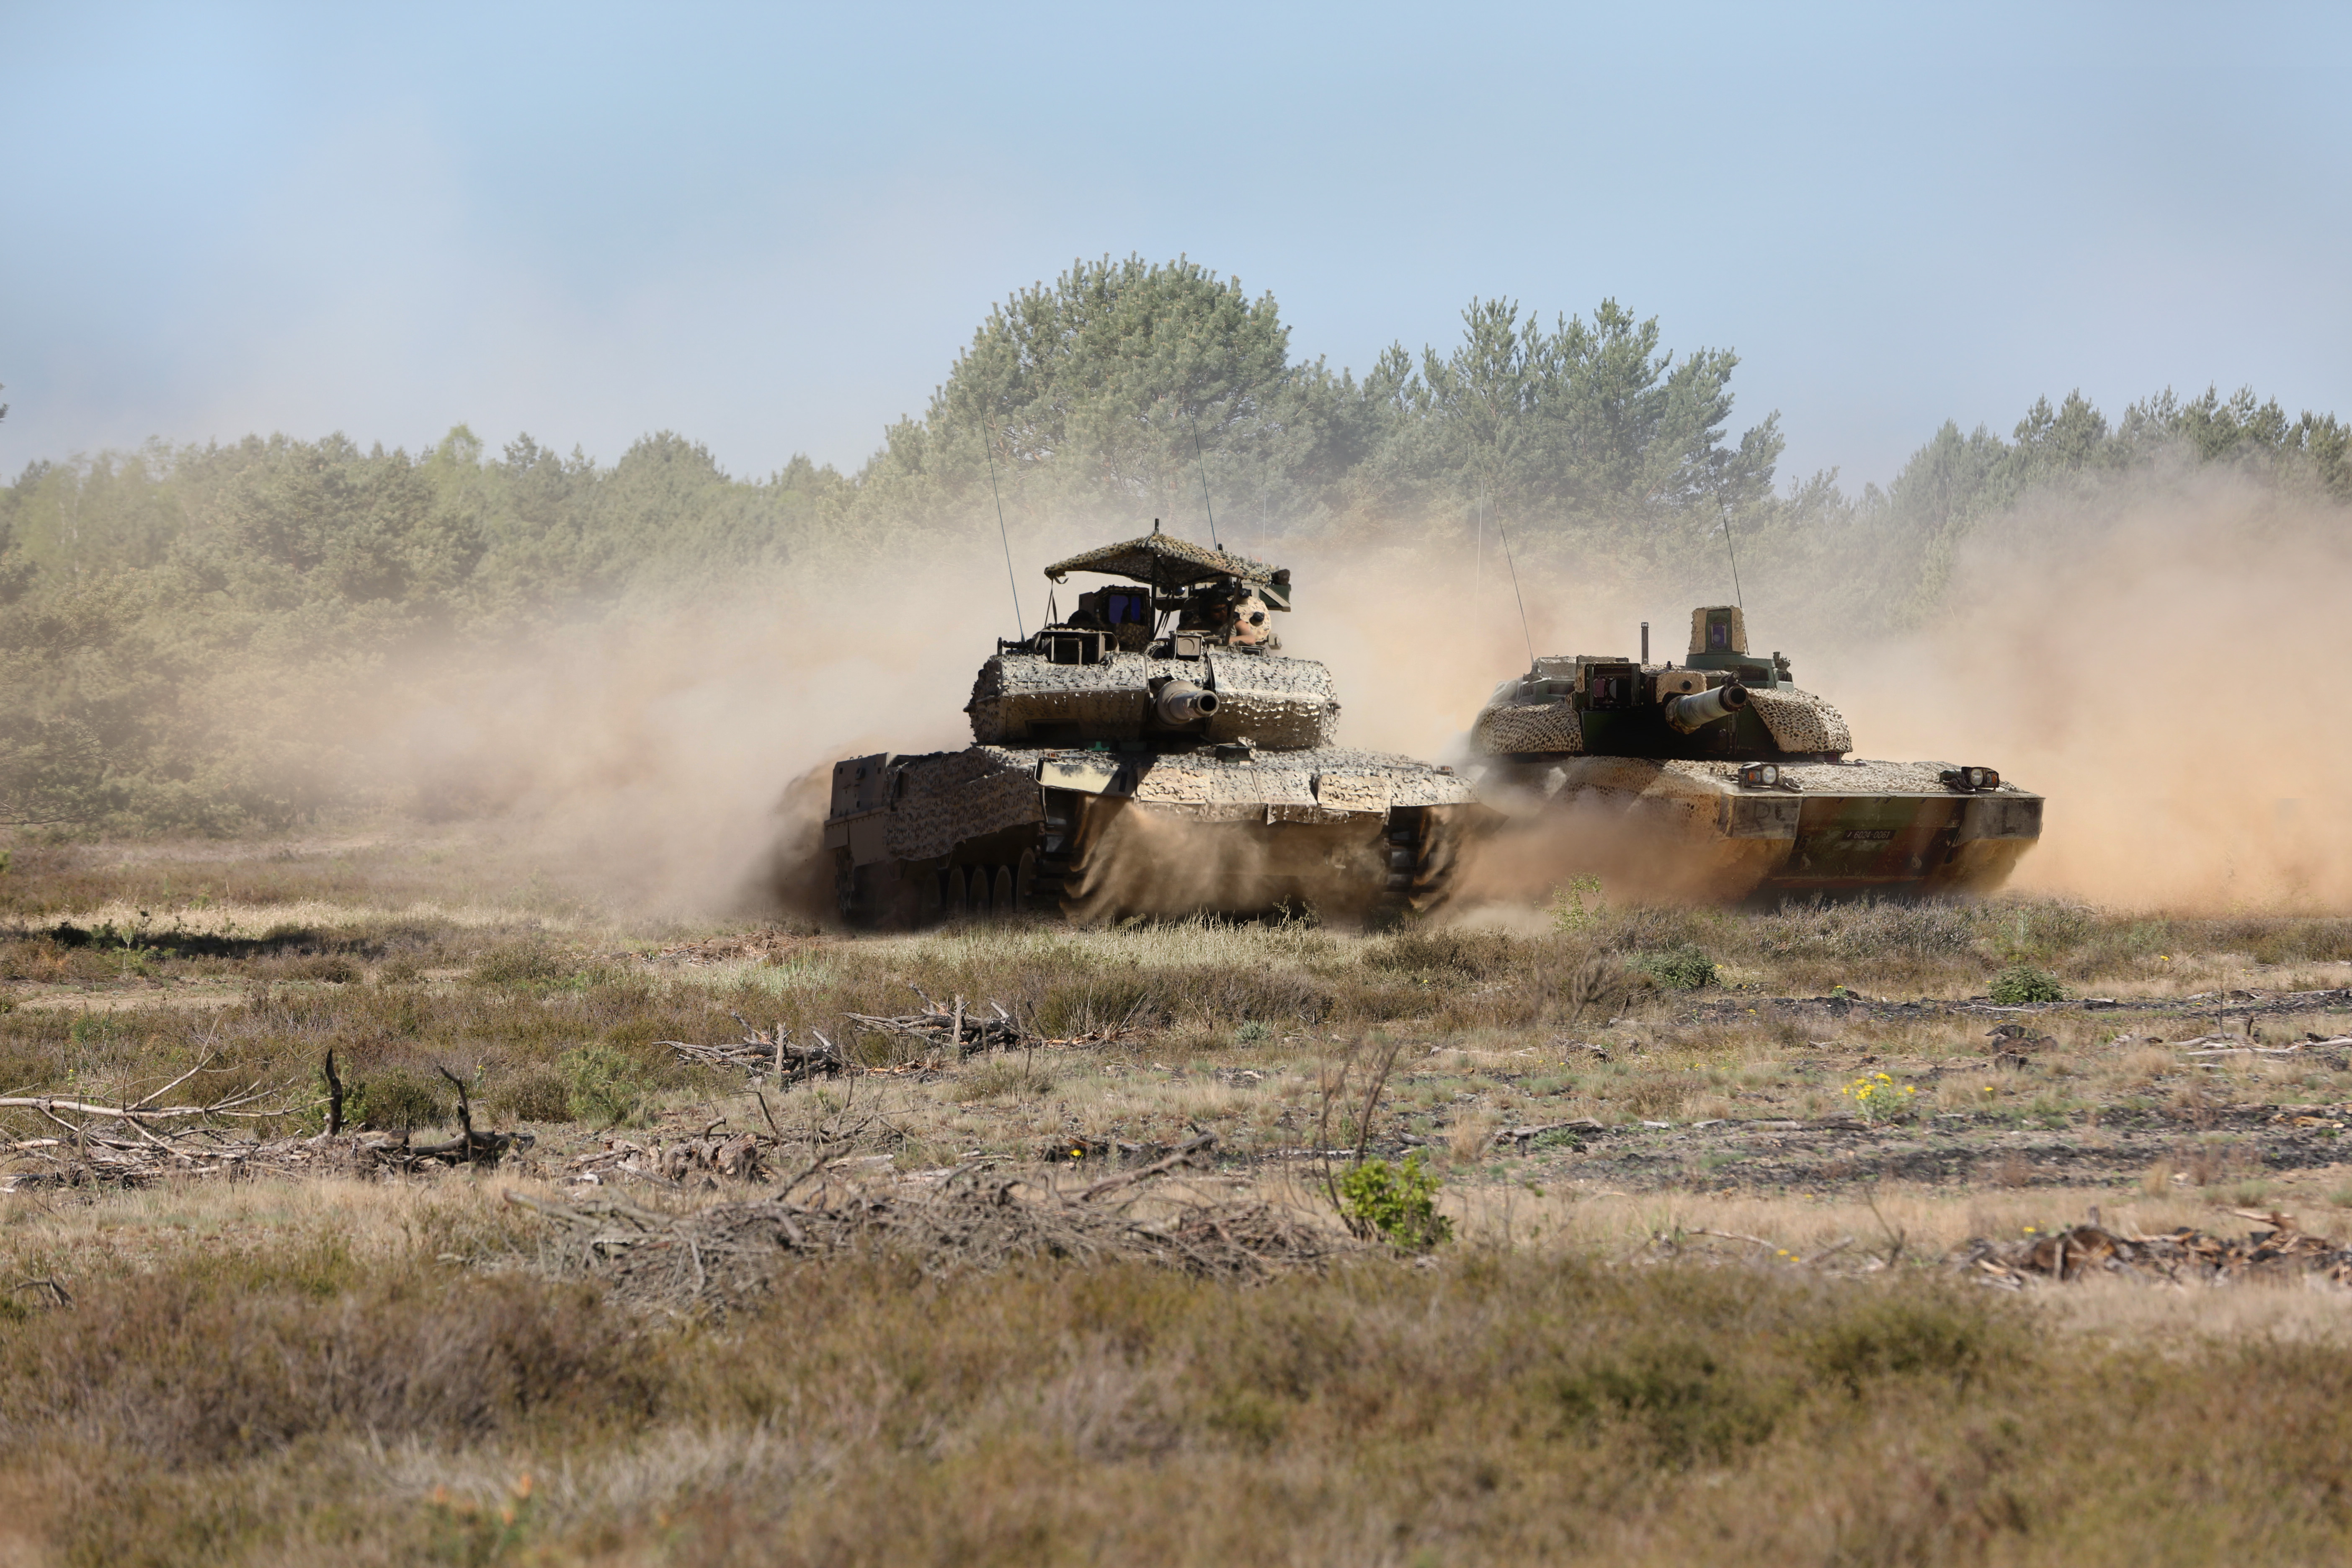 The tank manufacturer KNDS has announced the creation of a branch in Ukraine